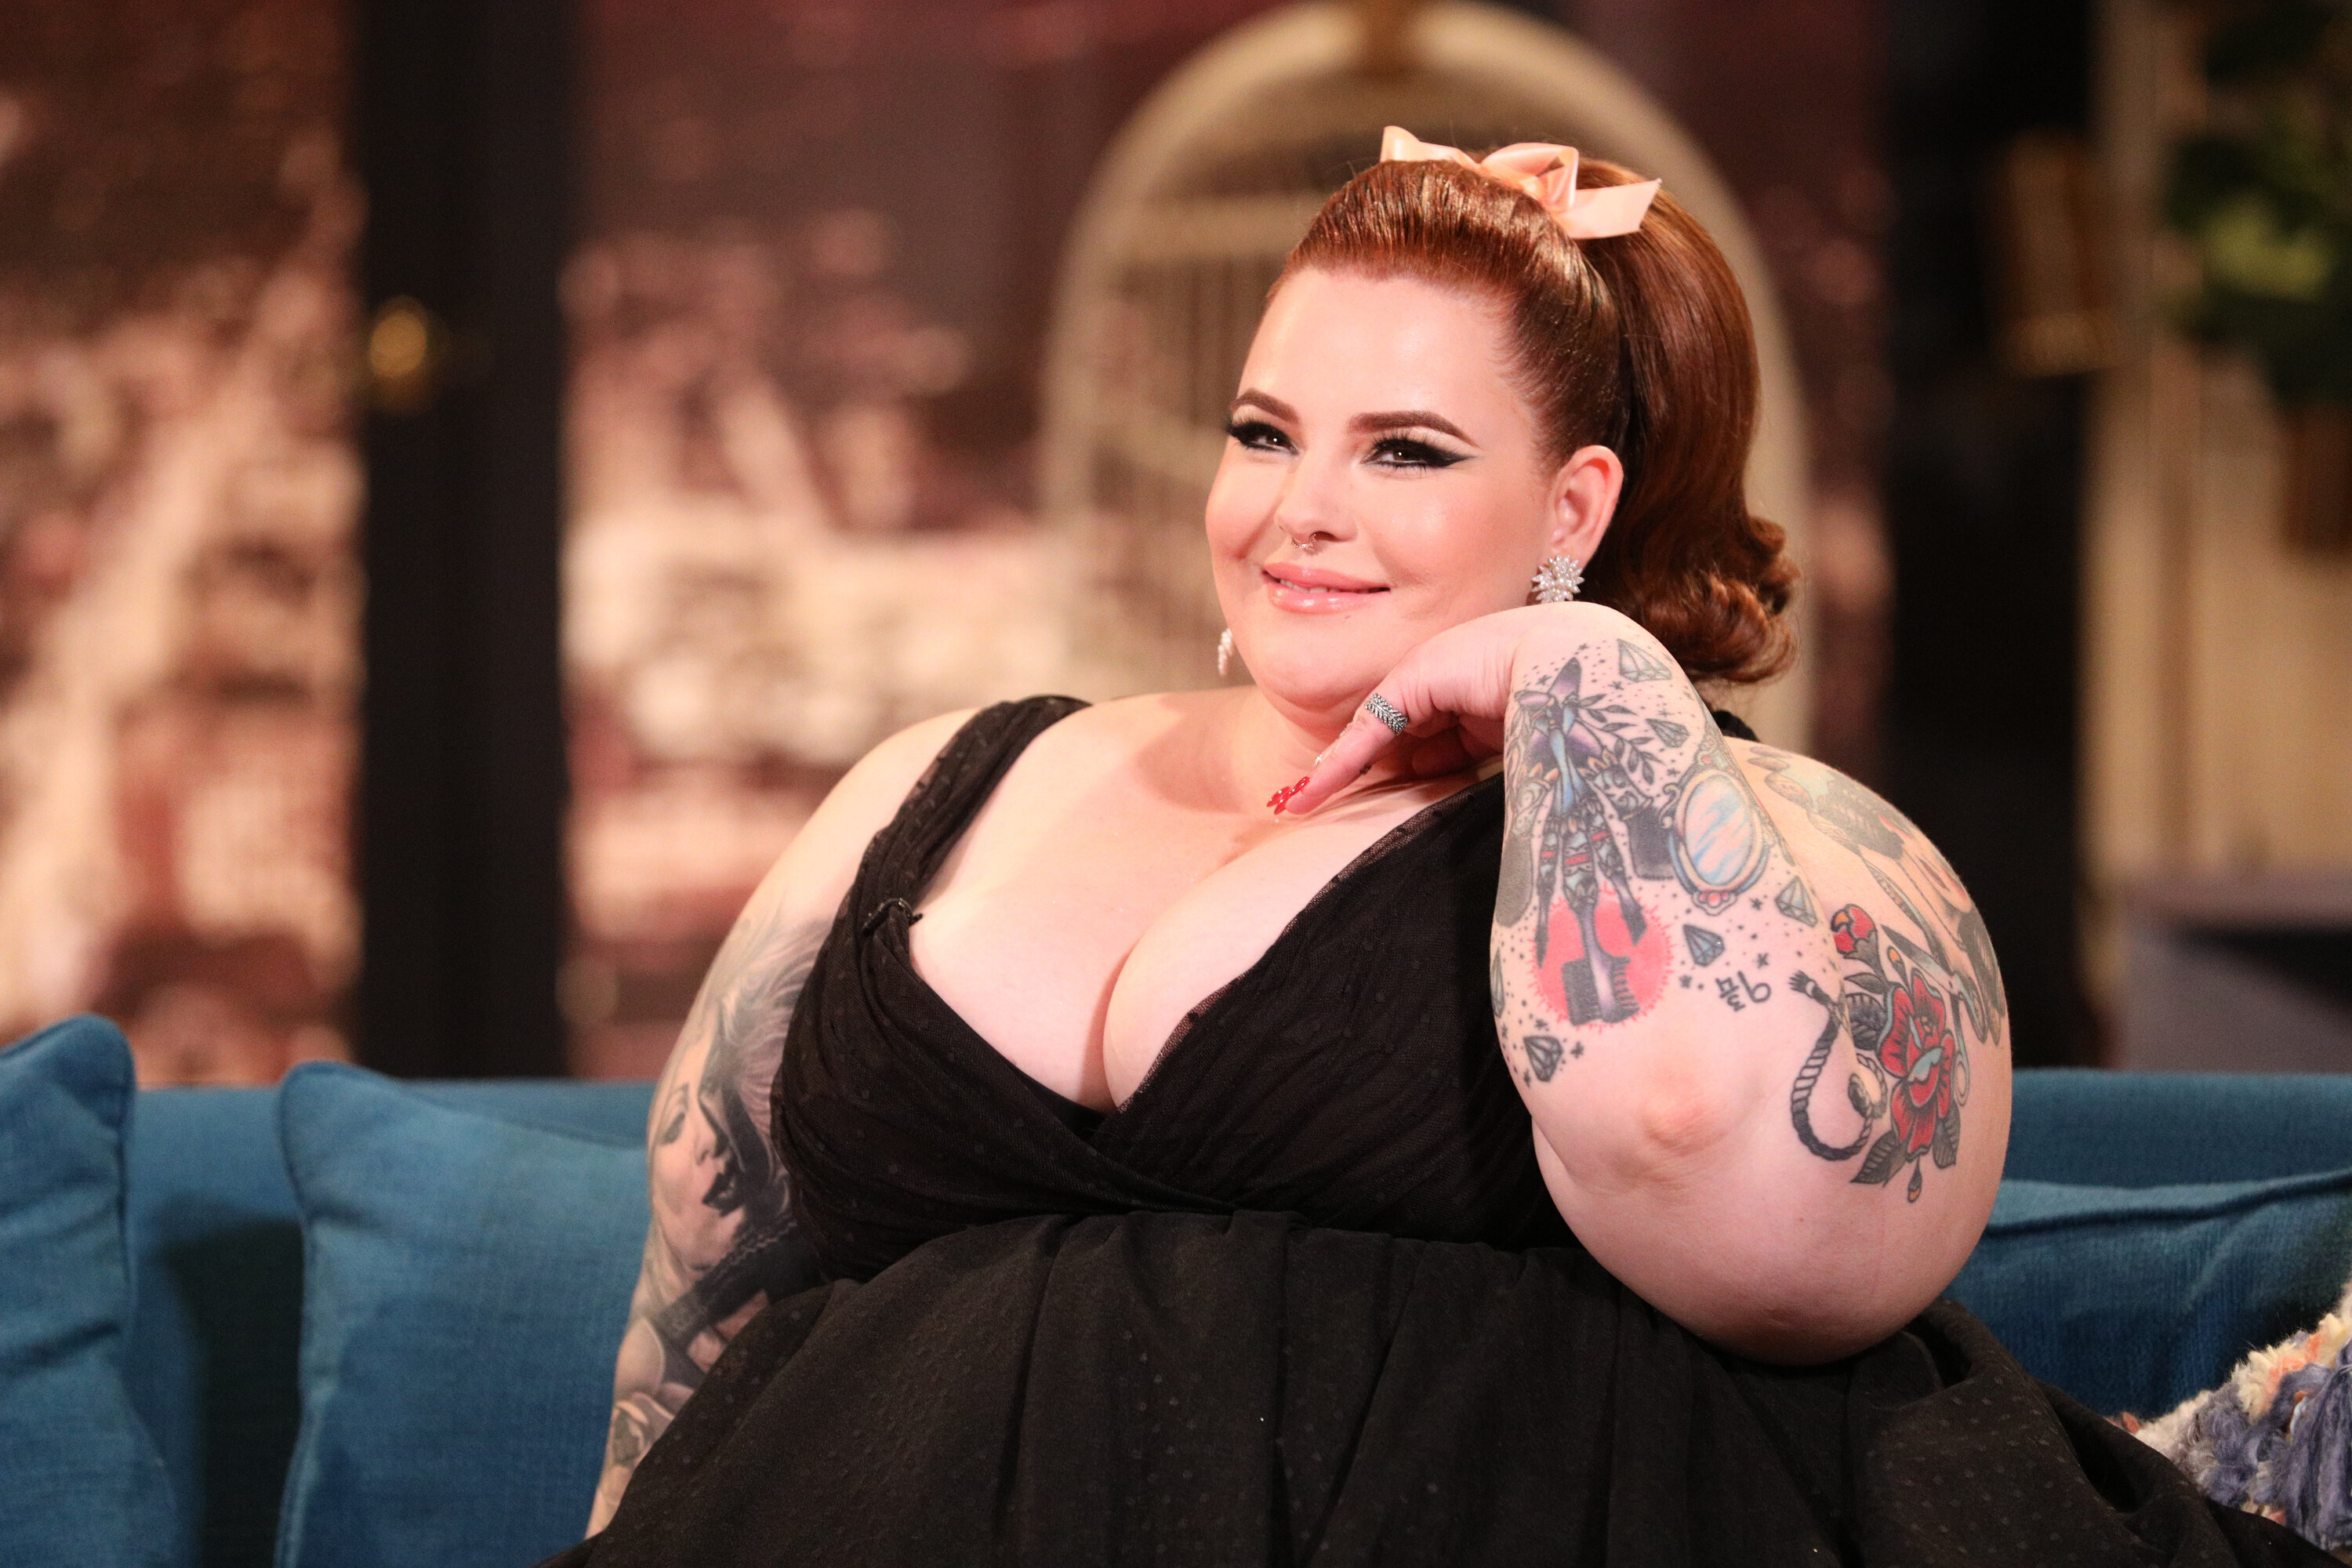 Like Tess Holliday, Im Fat And I Just Want To Live My Damn Life HuffPost HuffPost Personal photo